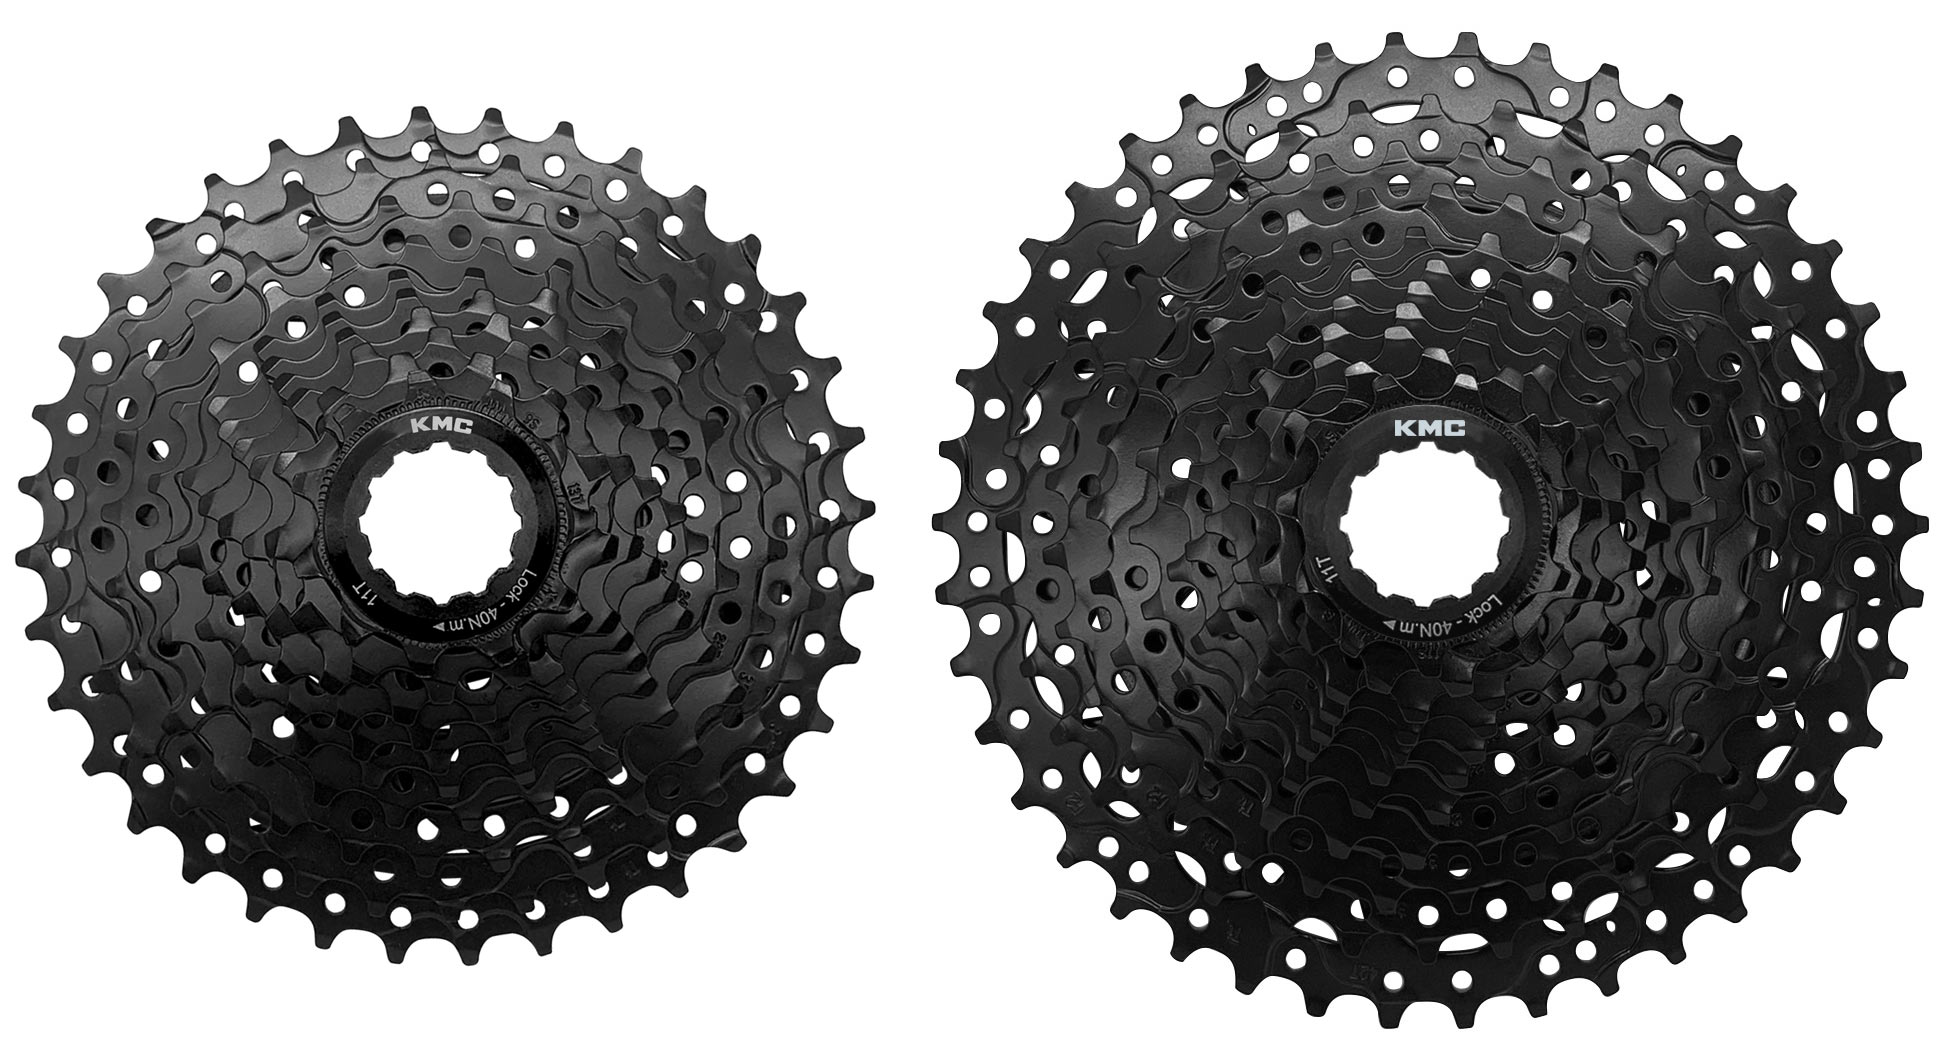 KMC REACT 10-speed chains